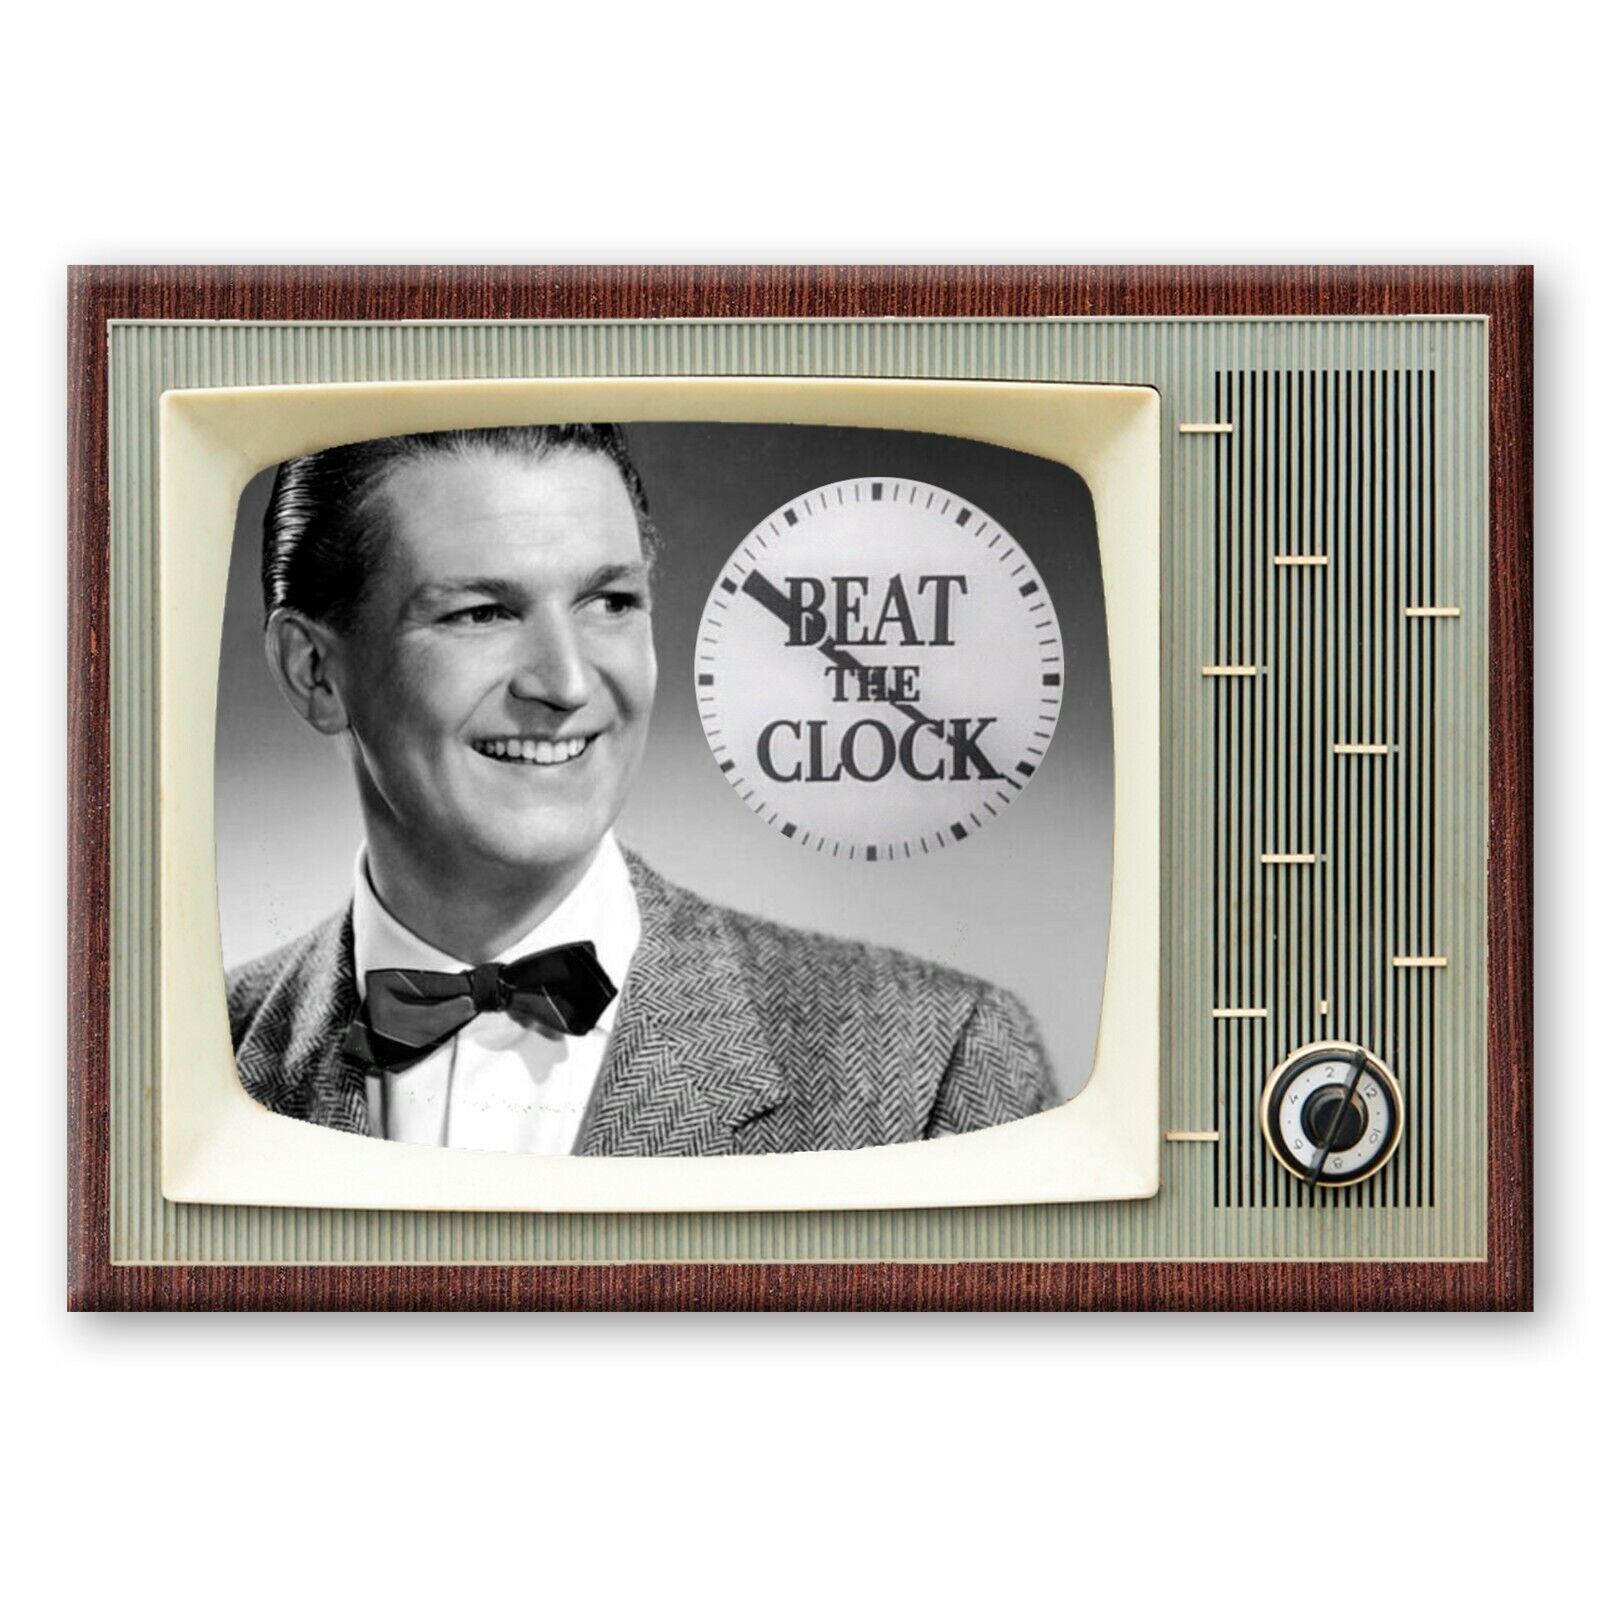 BEAT THE CLOCK TV Show Classic TV 3.5 inches x 2.5 inches FRIDGE MAGNET